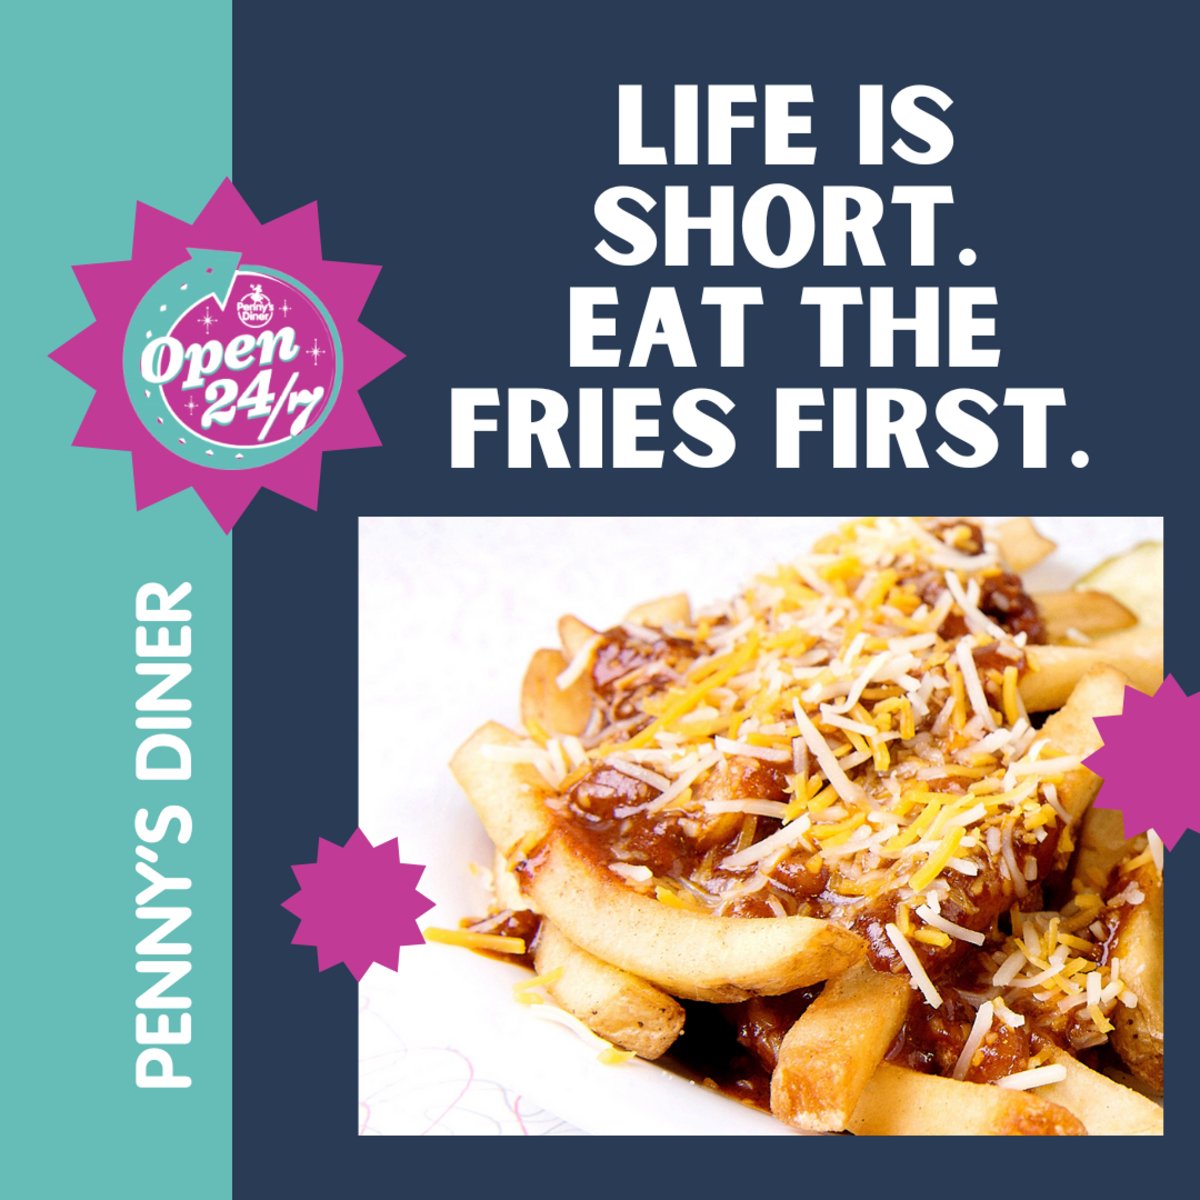 Like we always say at Penny's Diner Green River, chili cheese the day! Stop by and kick off your feast with a basket of our legendary #chilicheesefries. Get 'em while they're hot!🔥🍟 #PennysDiner